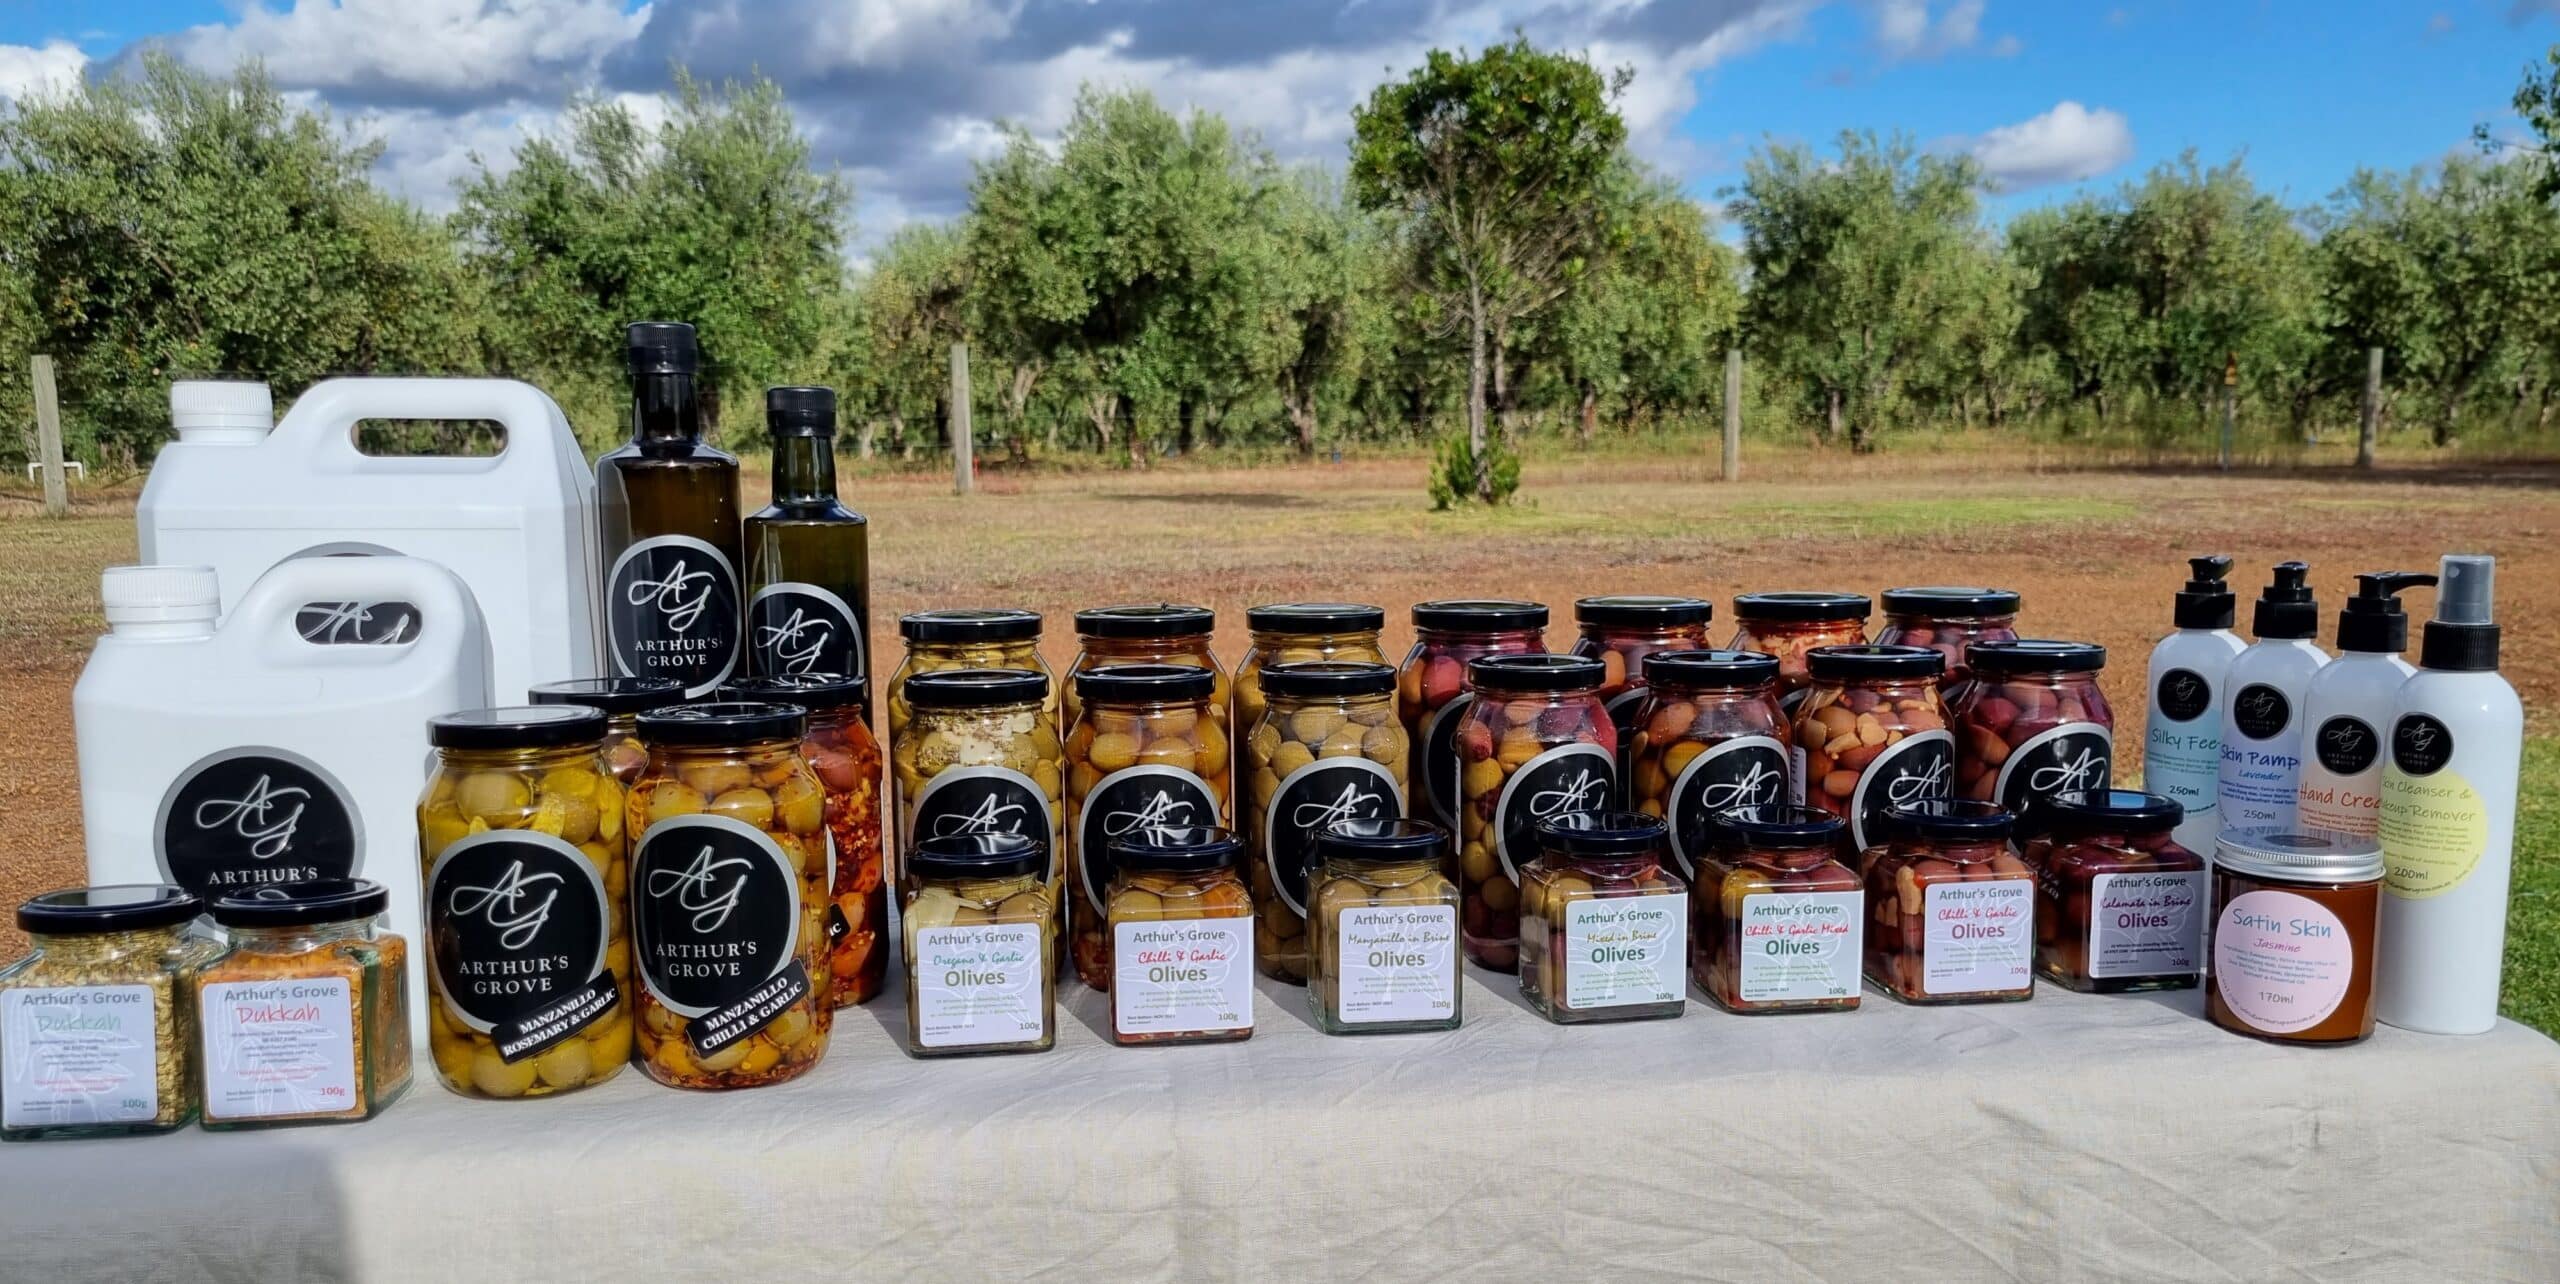 Olive product range from Arthur's Grove in Western Australia